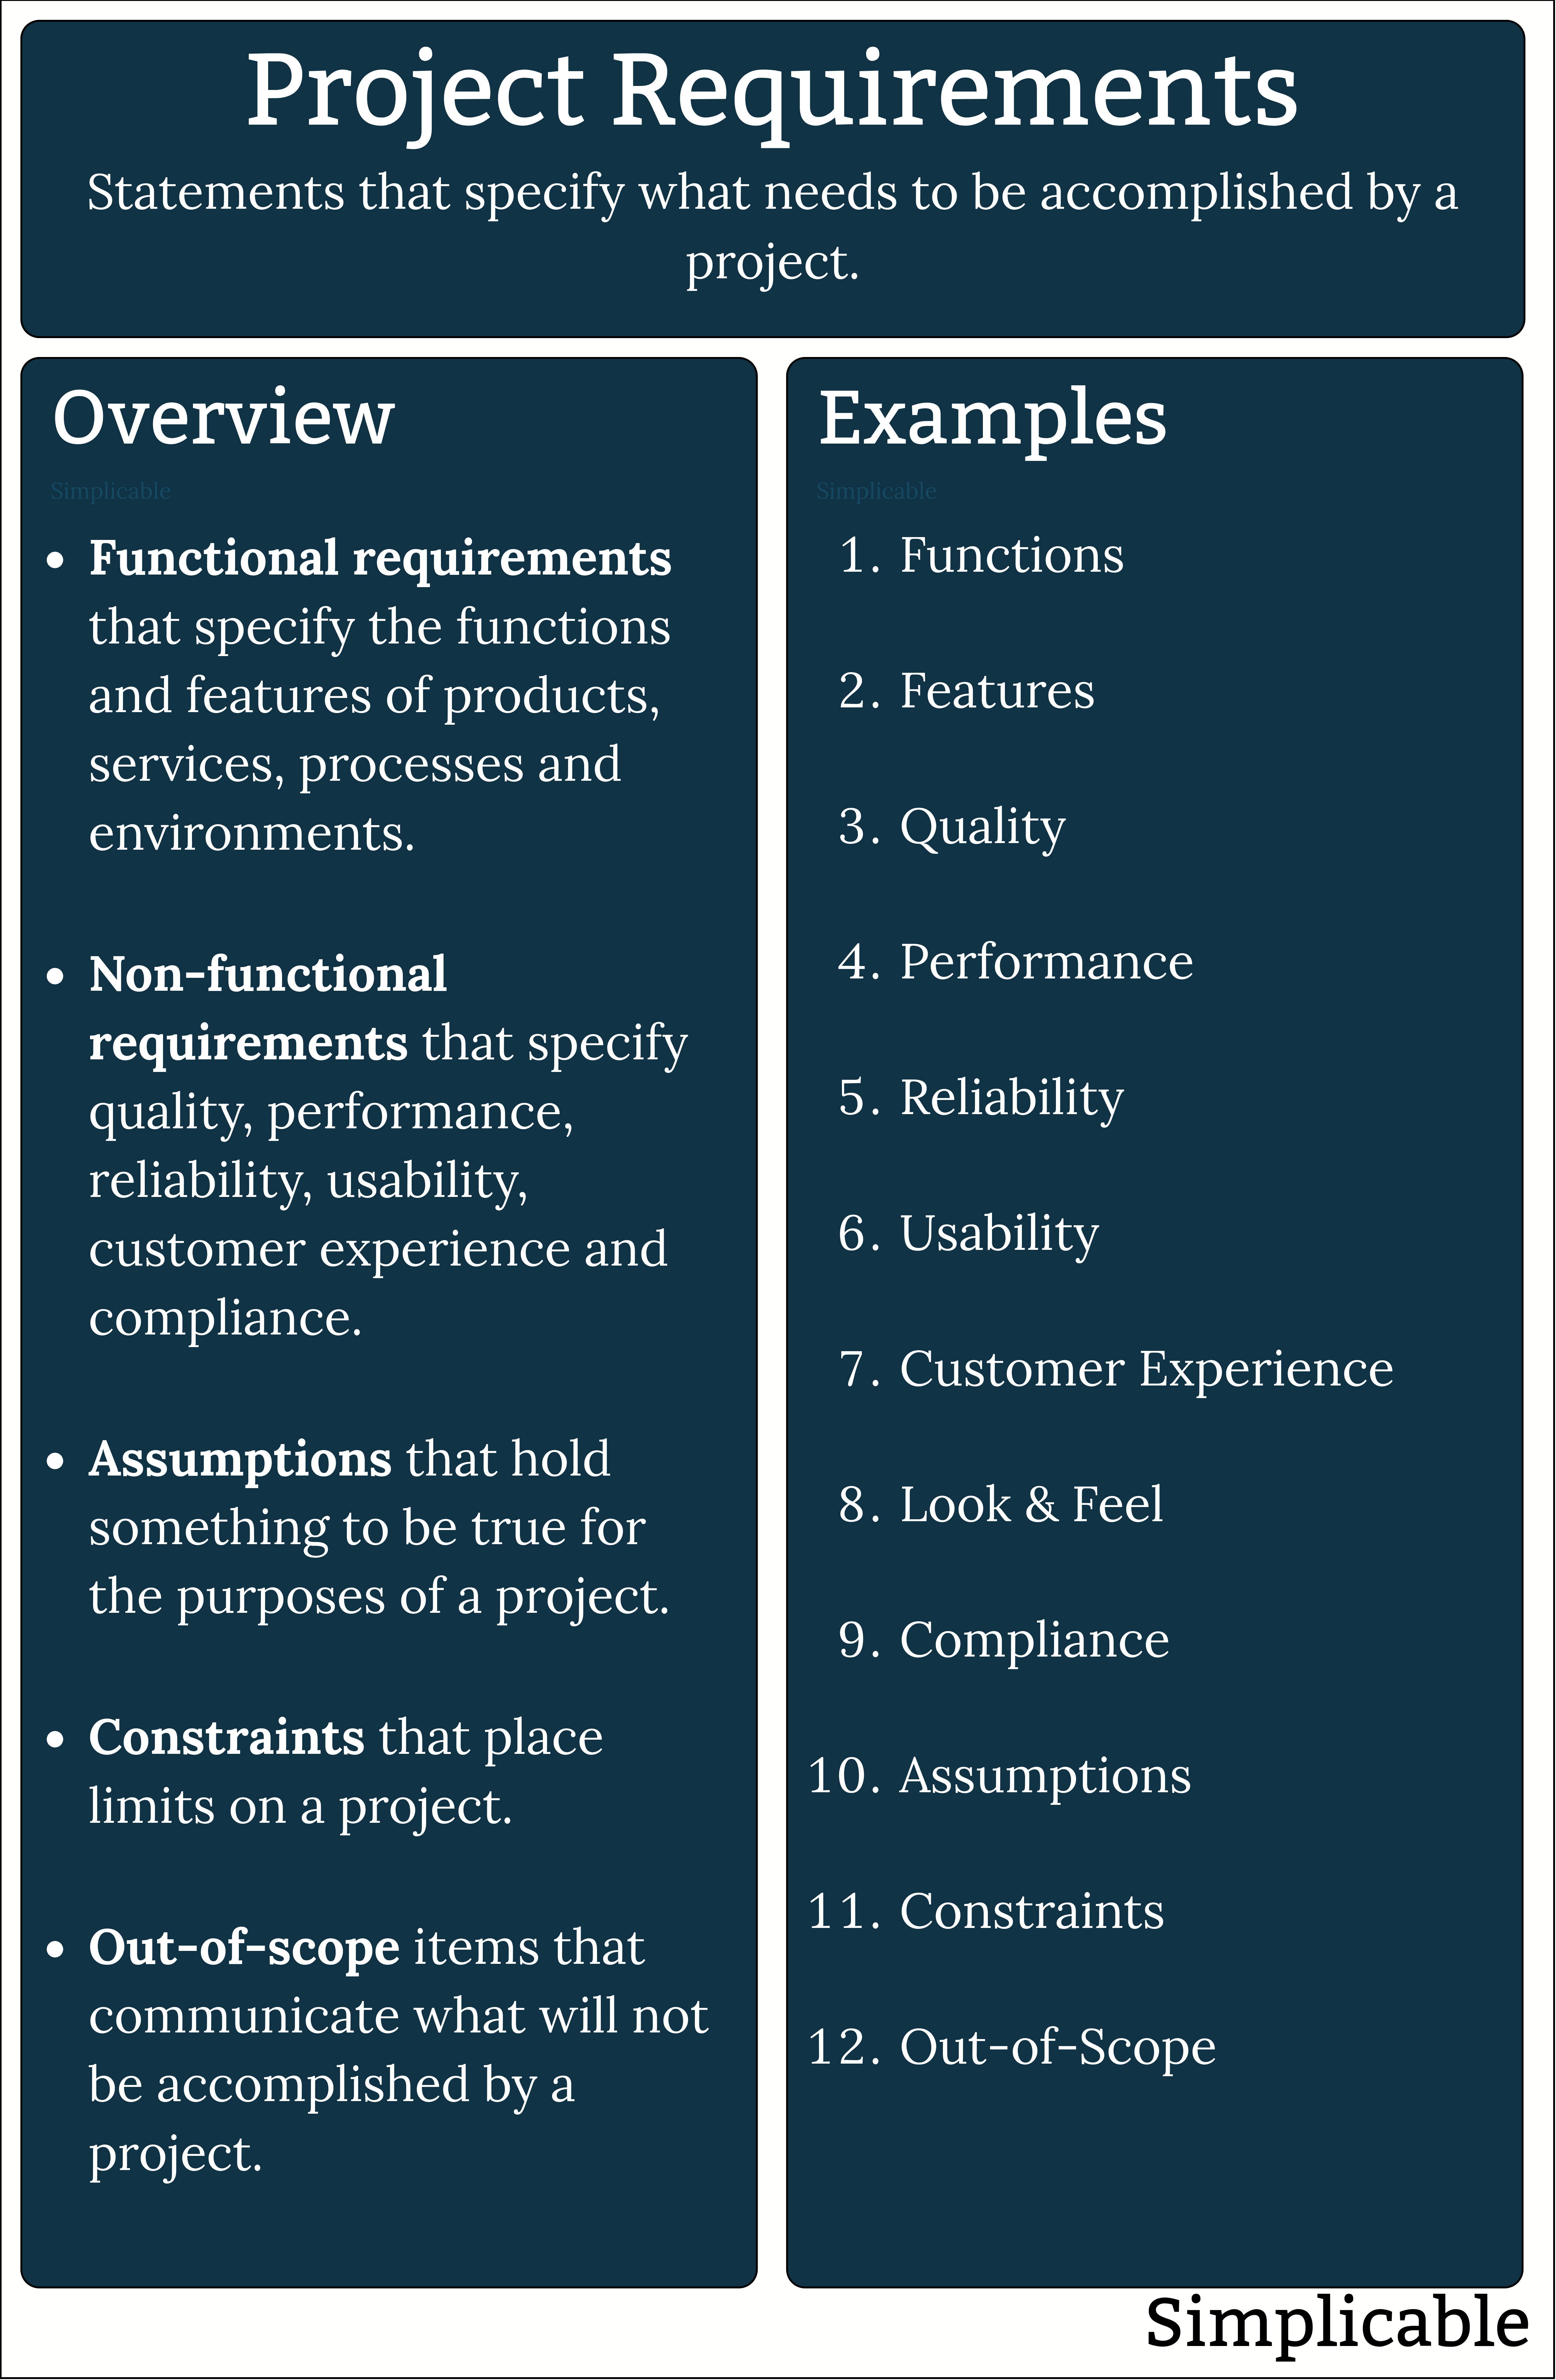 project requirements overview summary